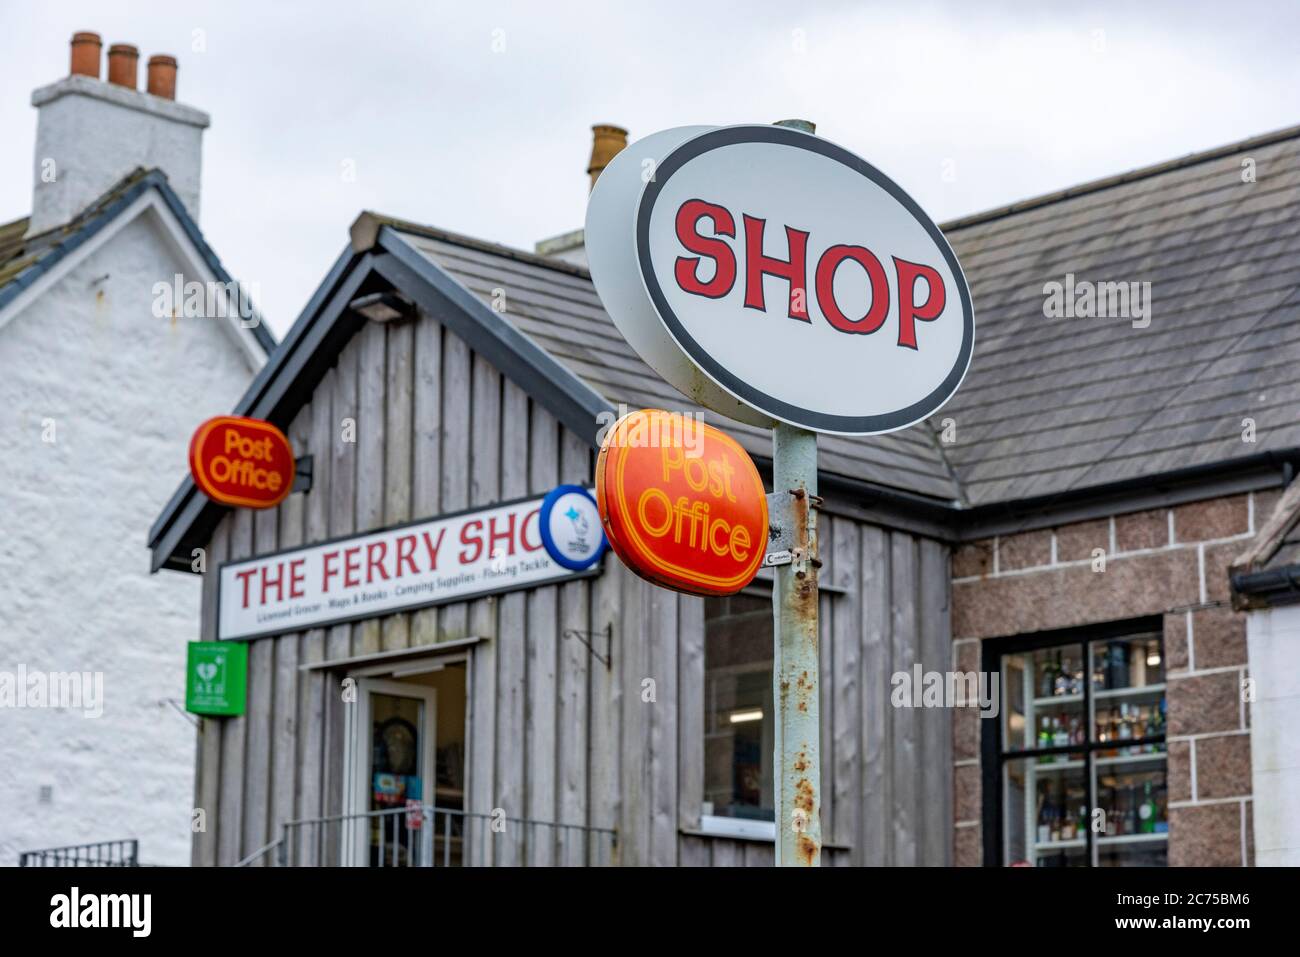 The Ferry Shop and Post Office, Fionnphort, Isle of Mull, Argyll and Bute, Schottland, Vereinigtes Königreich. Stockfoto